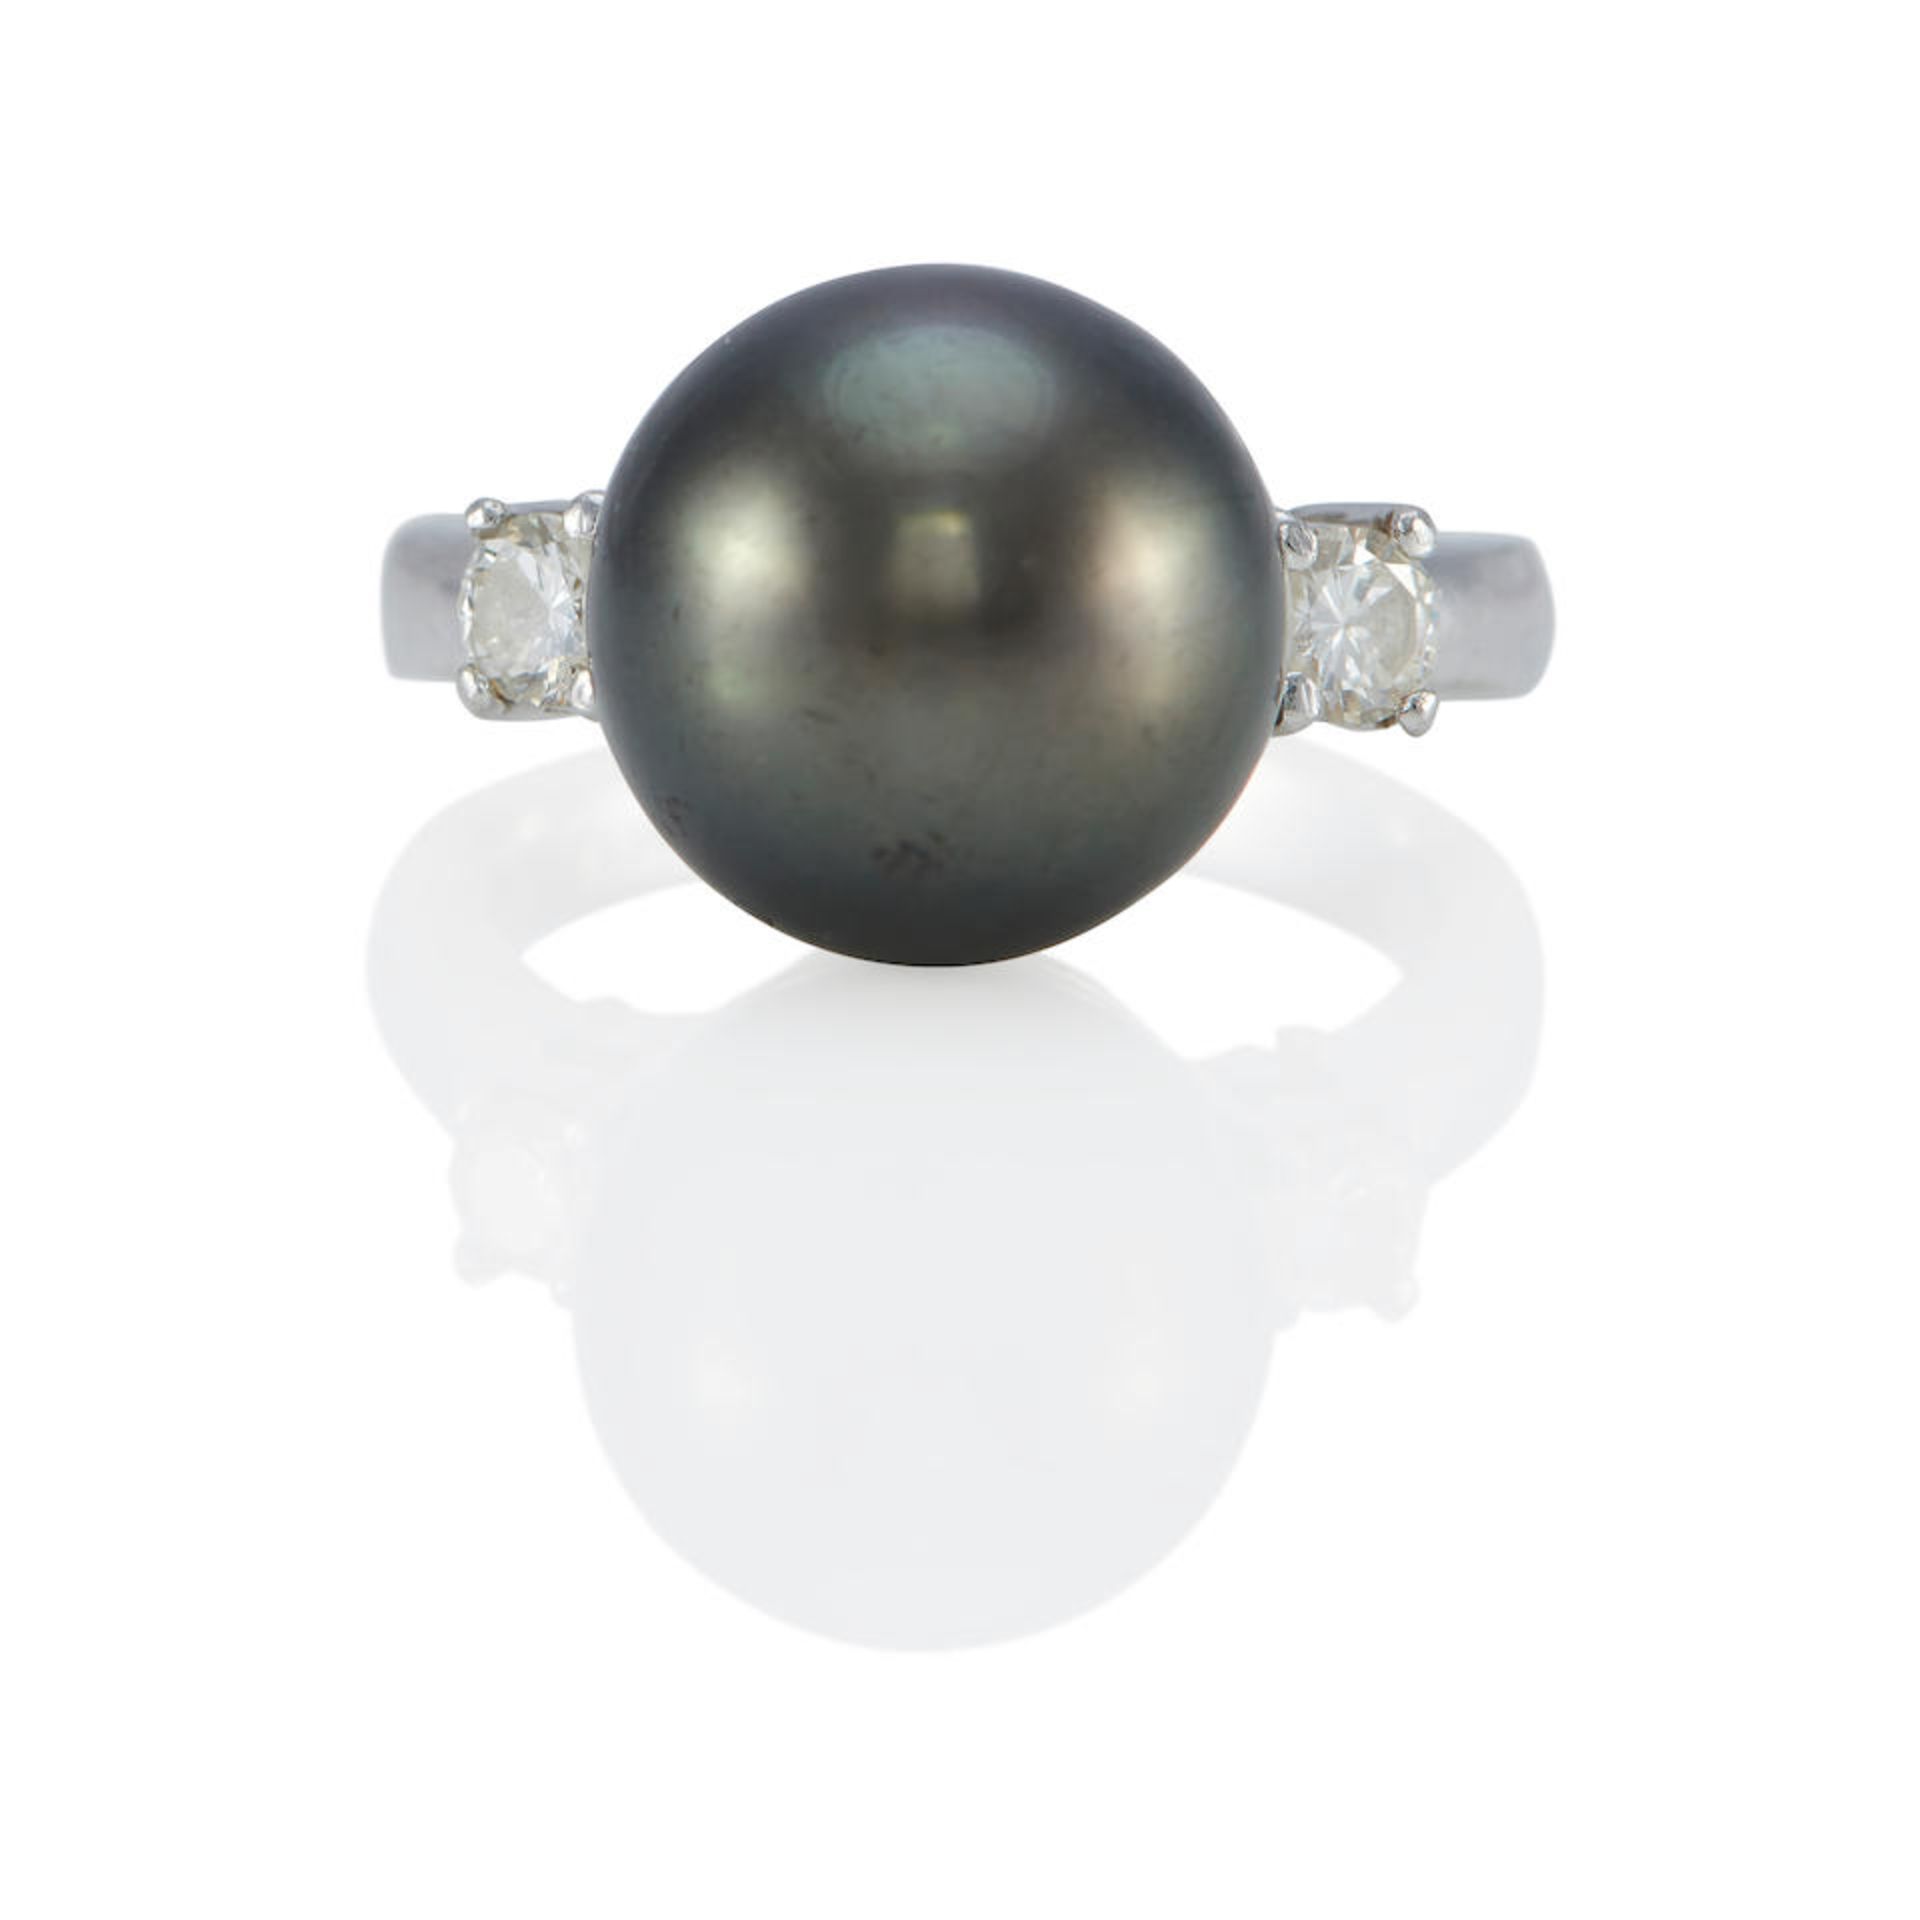 A PLATINUM, COLORED CULTURED PEARL AND DIAMOND RING